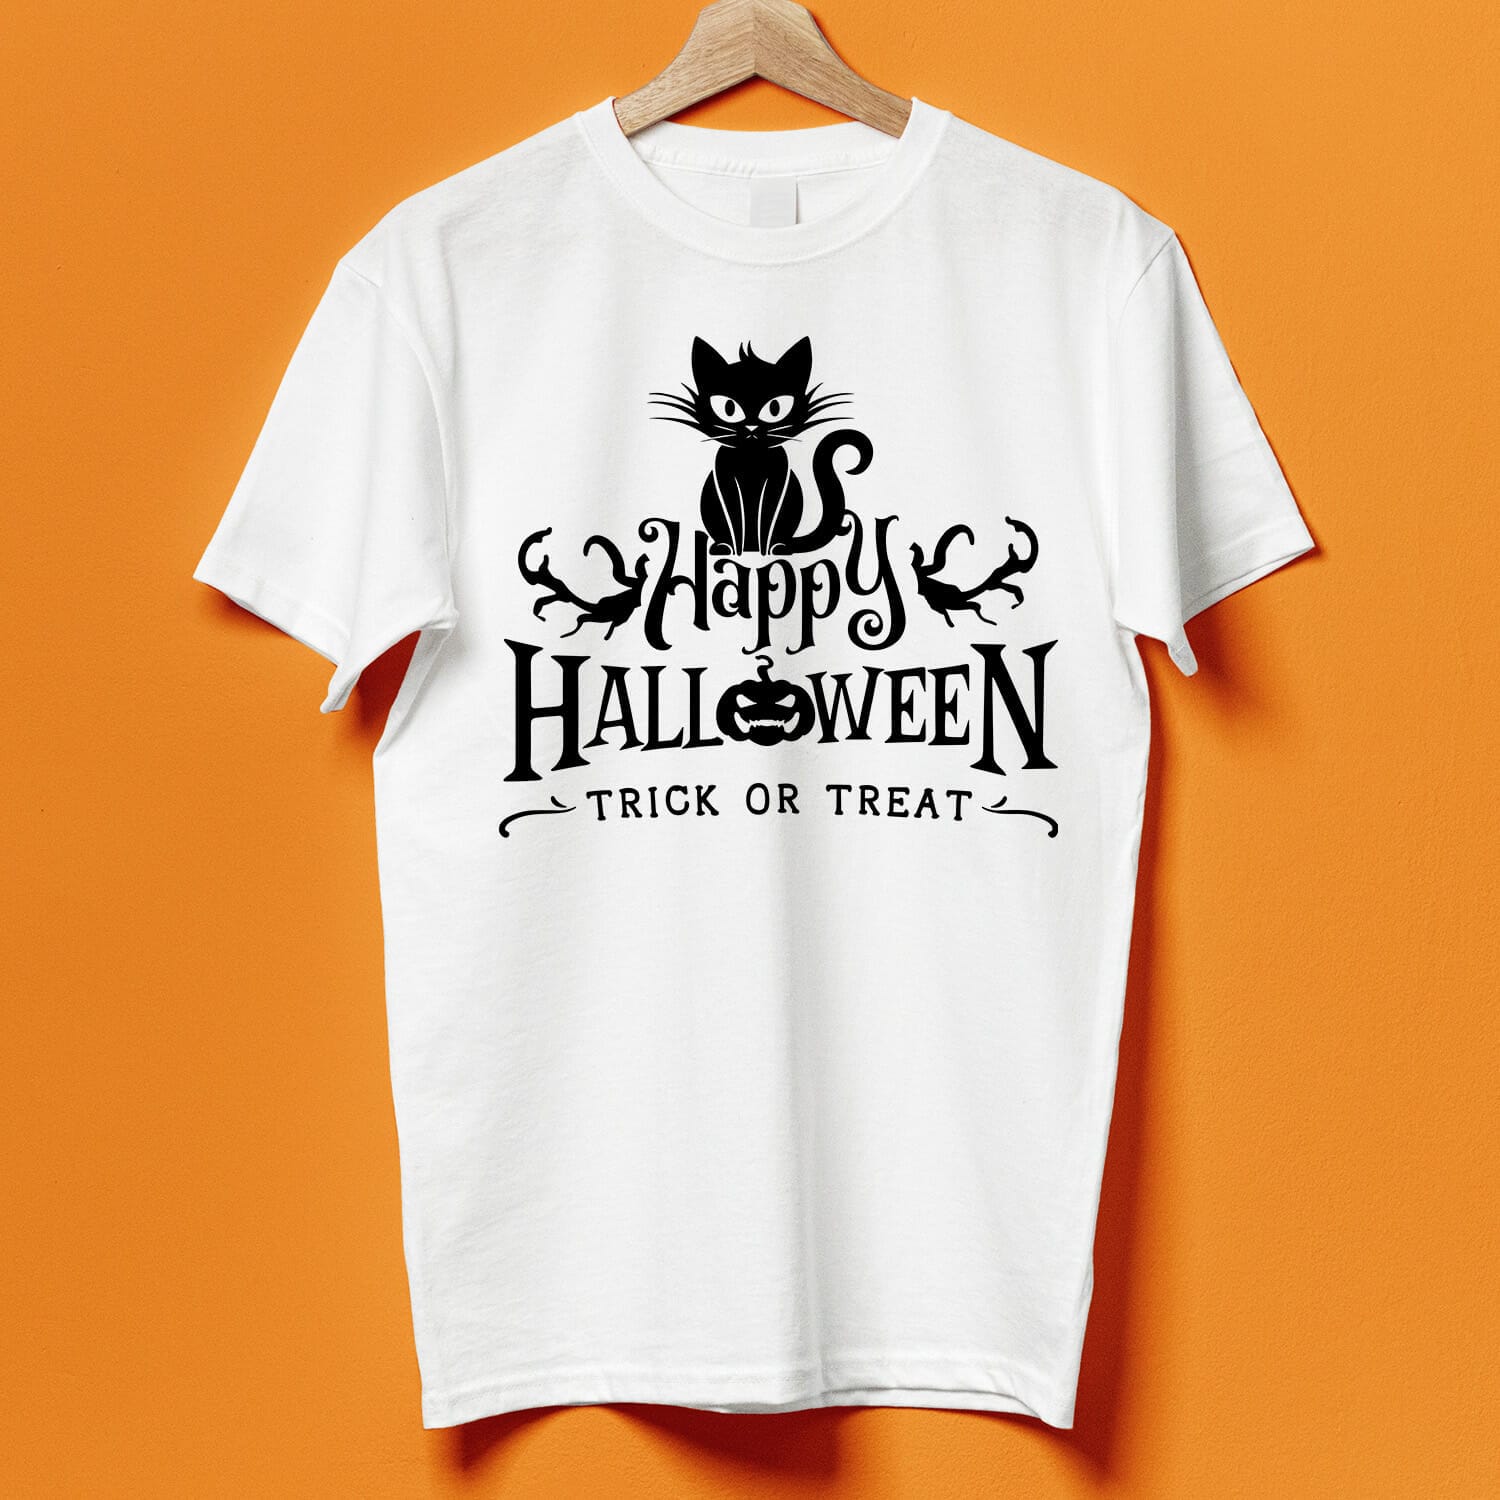 Halloween Scary Cat Trick or Treat T-Shirt Design